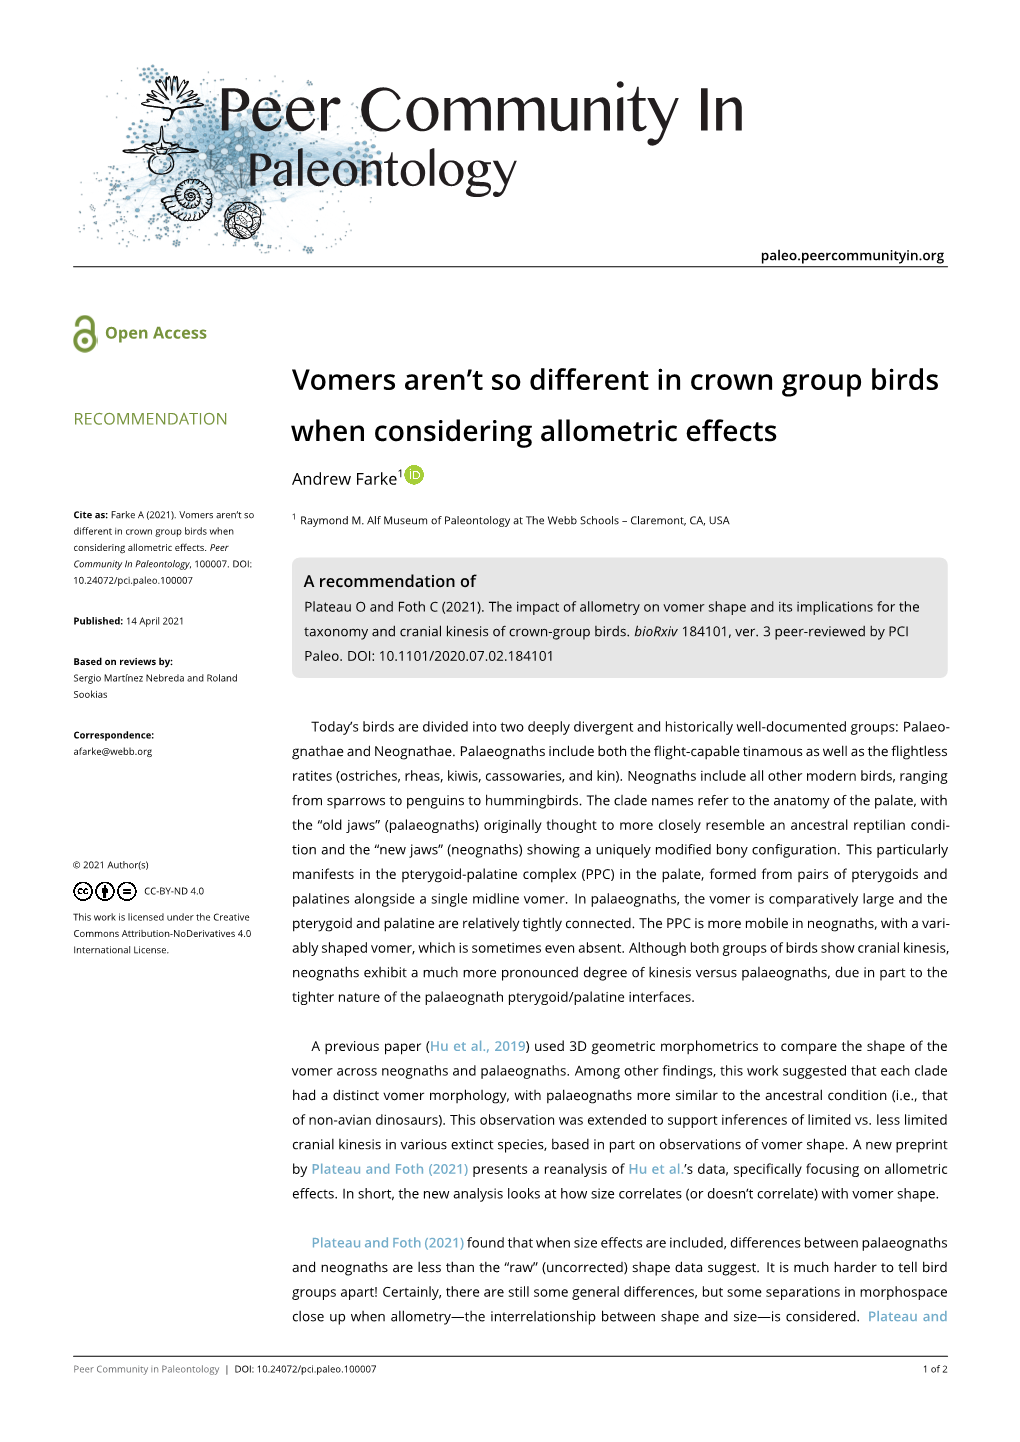 Vomers Aren't So Different in Crown Group Birds When Considering